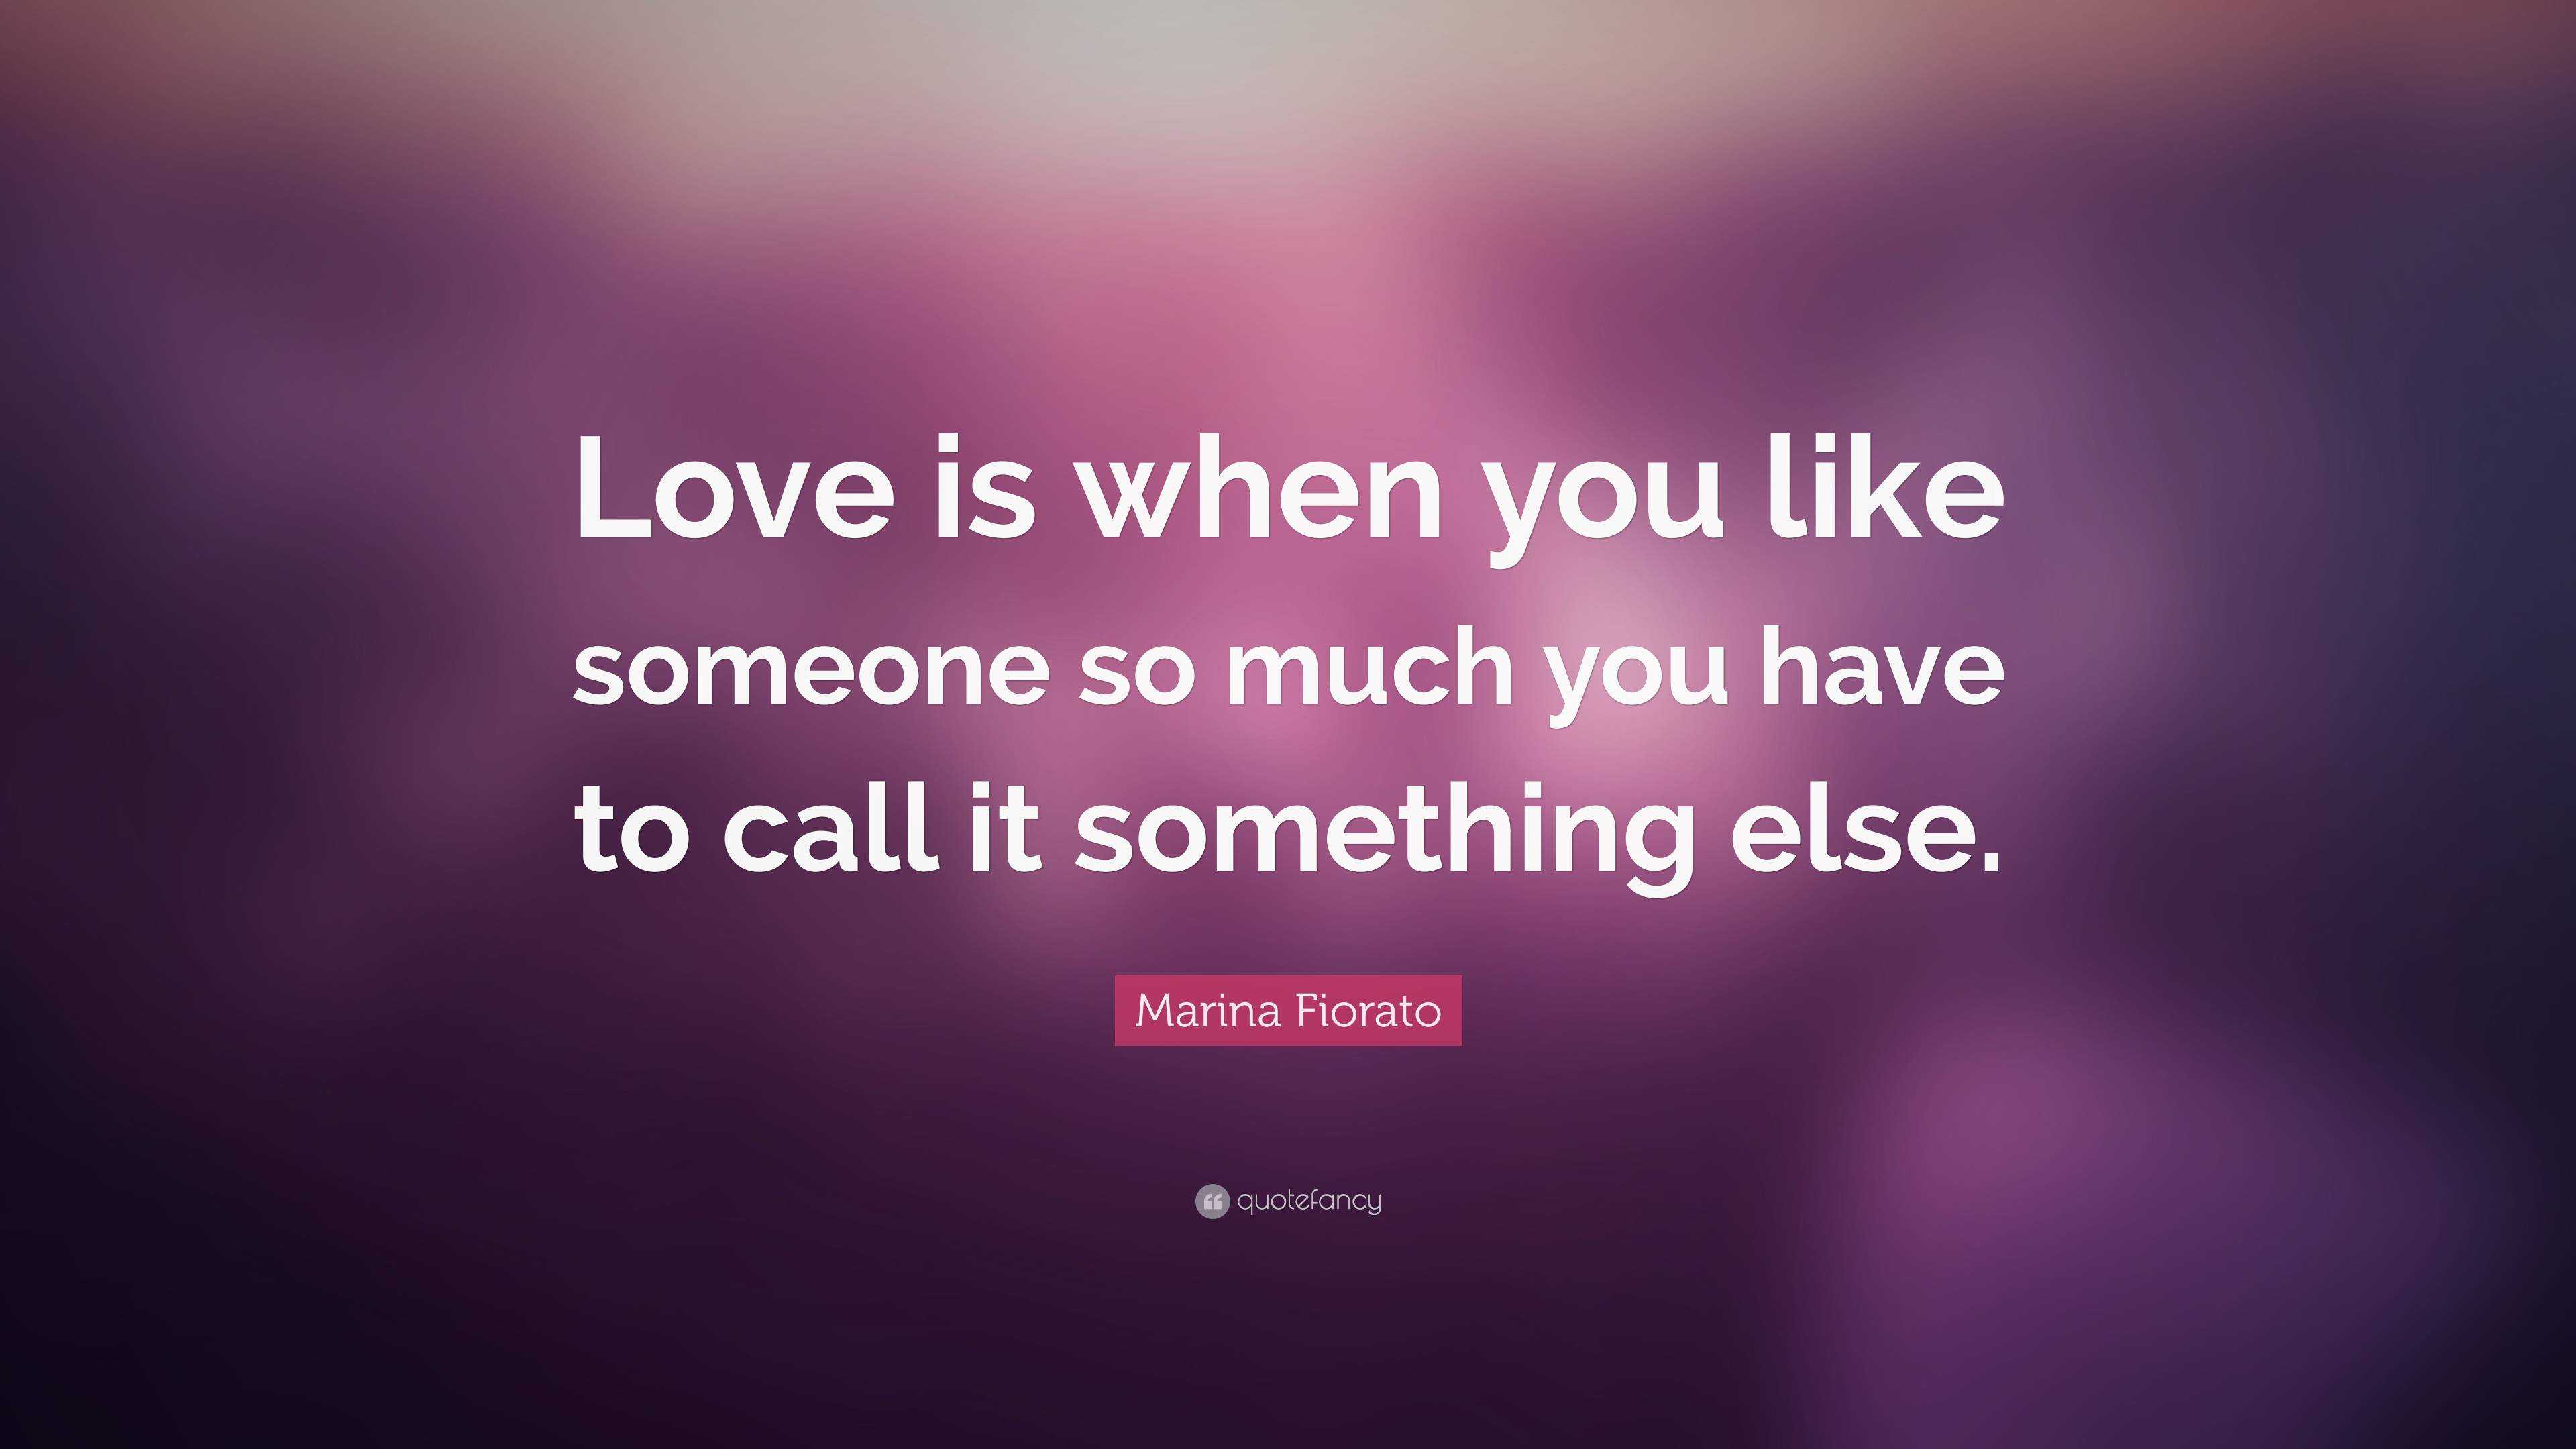 Marina Fiorato Quote: “Love is when you like someone so much you have ...